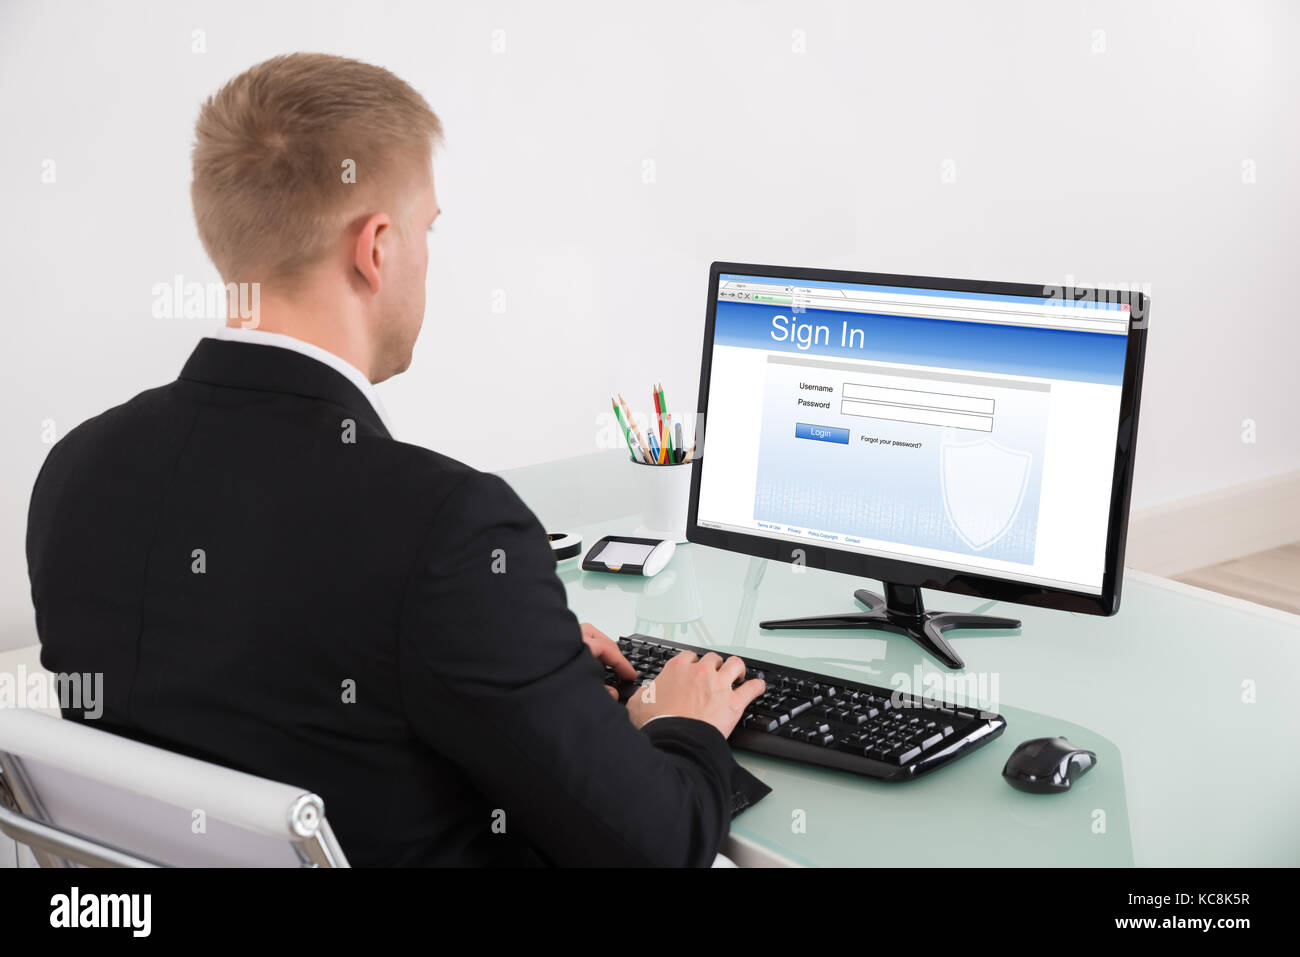 Young Businessman Signing Into Website At Office Stock Photo